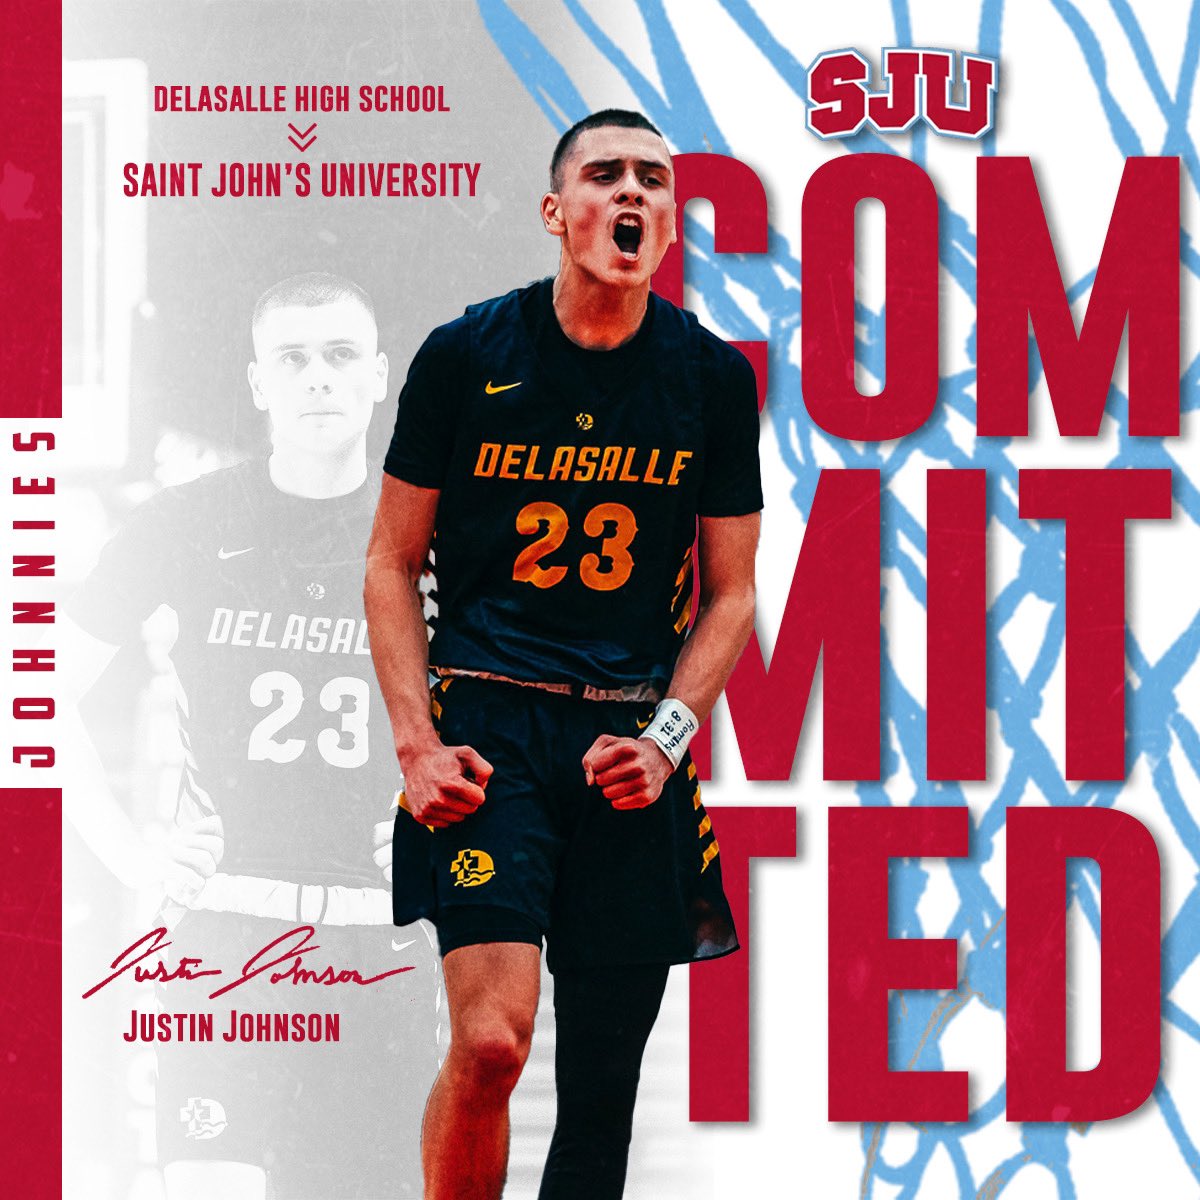 After long consideration, I’m excited to announce my commitment to St. John’s University to further my academics and athletics. I want to thank God, my family, coaches and all of my supporters along the way. #gojohnnies @SJU_Basketball @DeLaSalleMBB